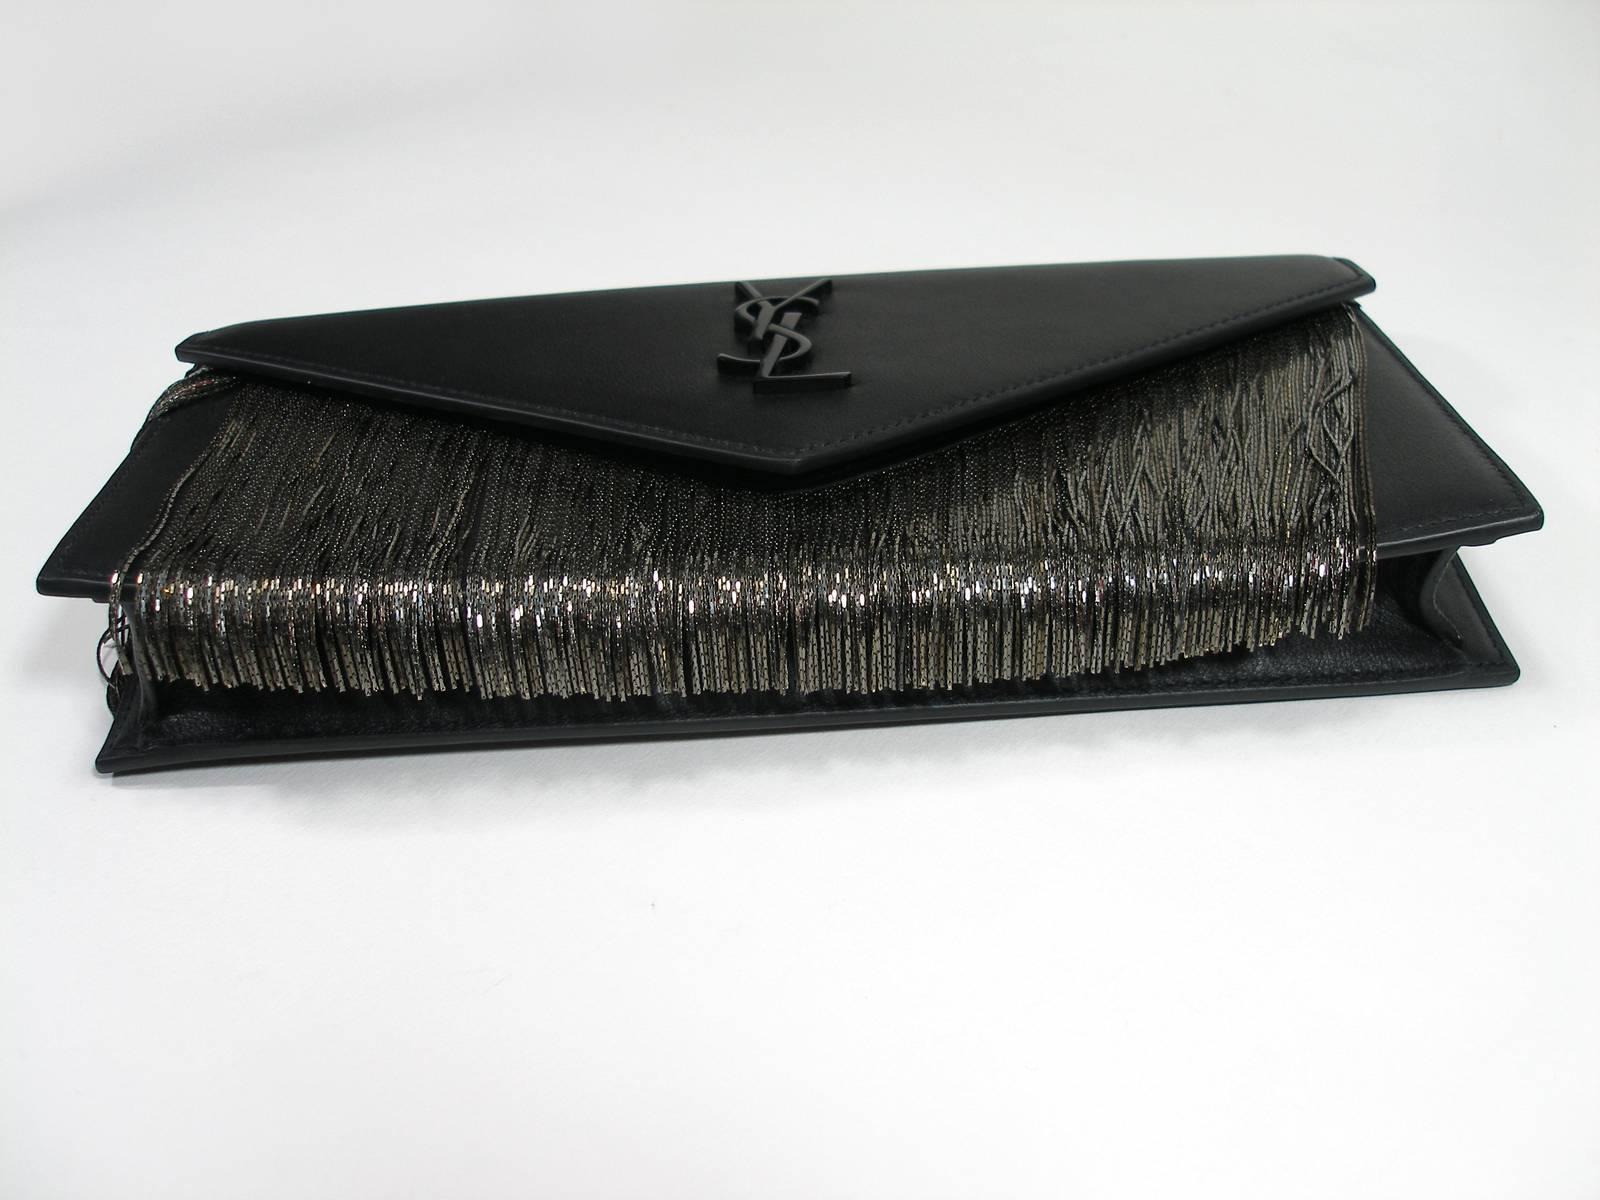 Yves Saint Laurent Le Sept Fringed Pouch in black leather / SOLD OUT in shop YSL For Sale 1